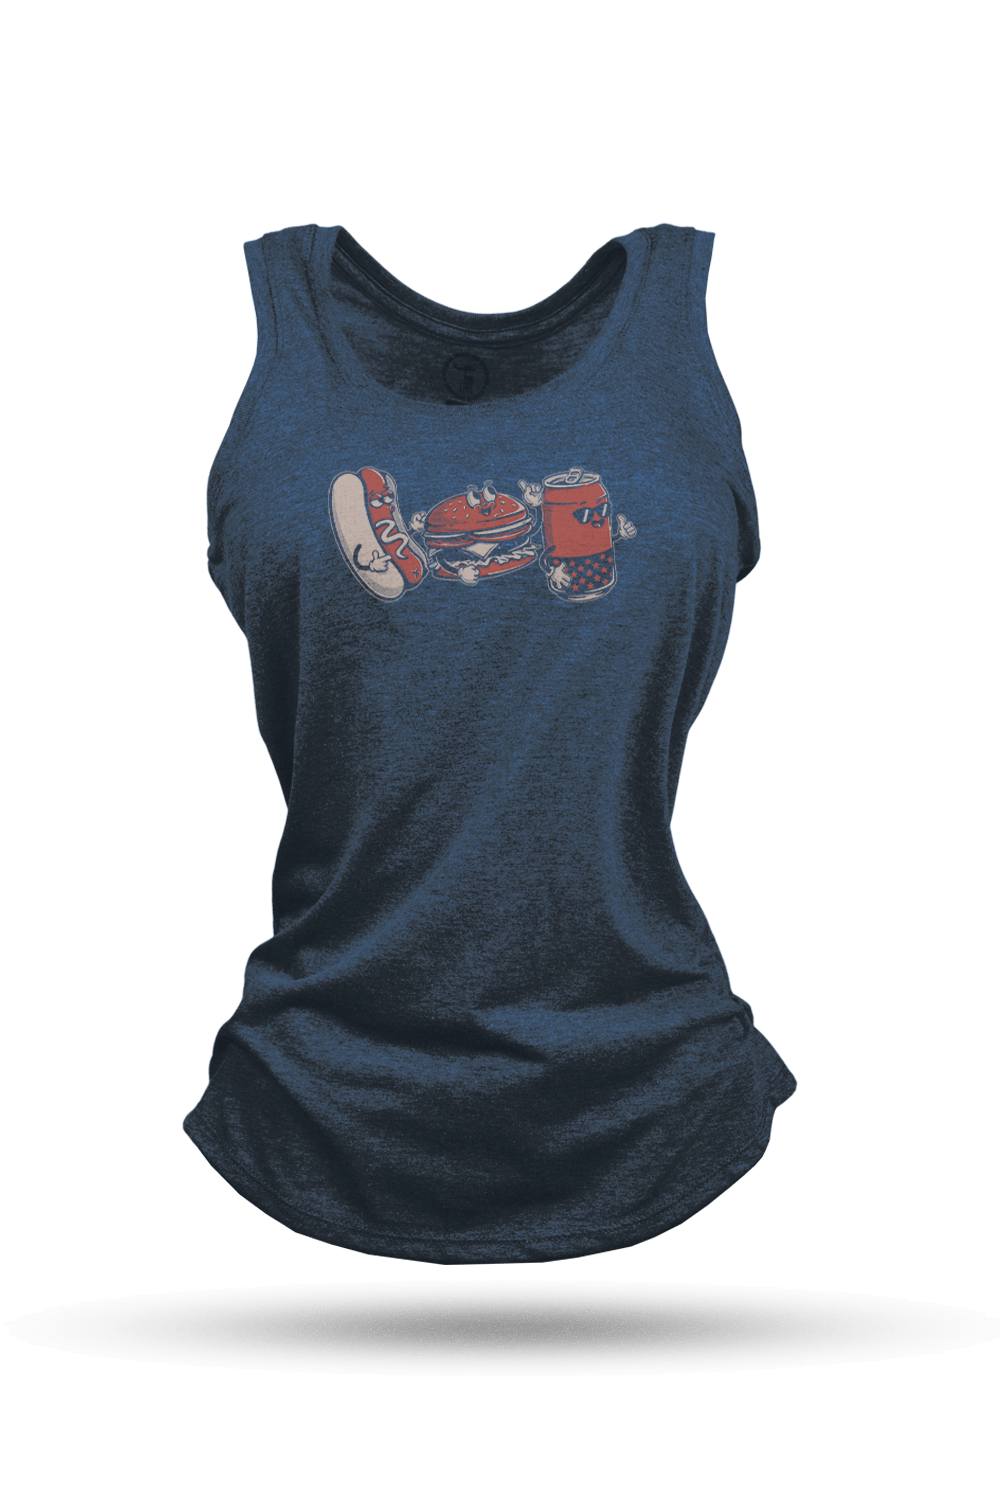 Women's Racerback Tank - Let's All Go To The BBQ